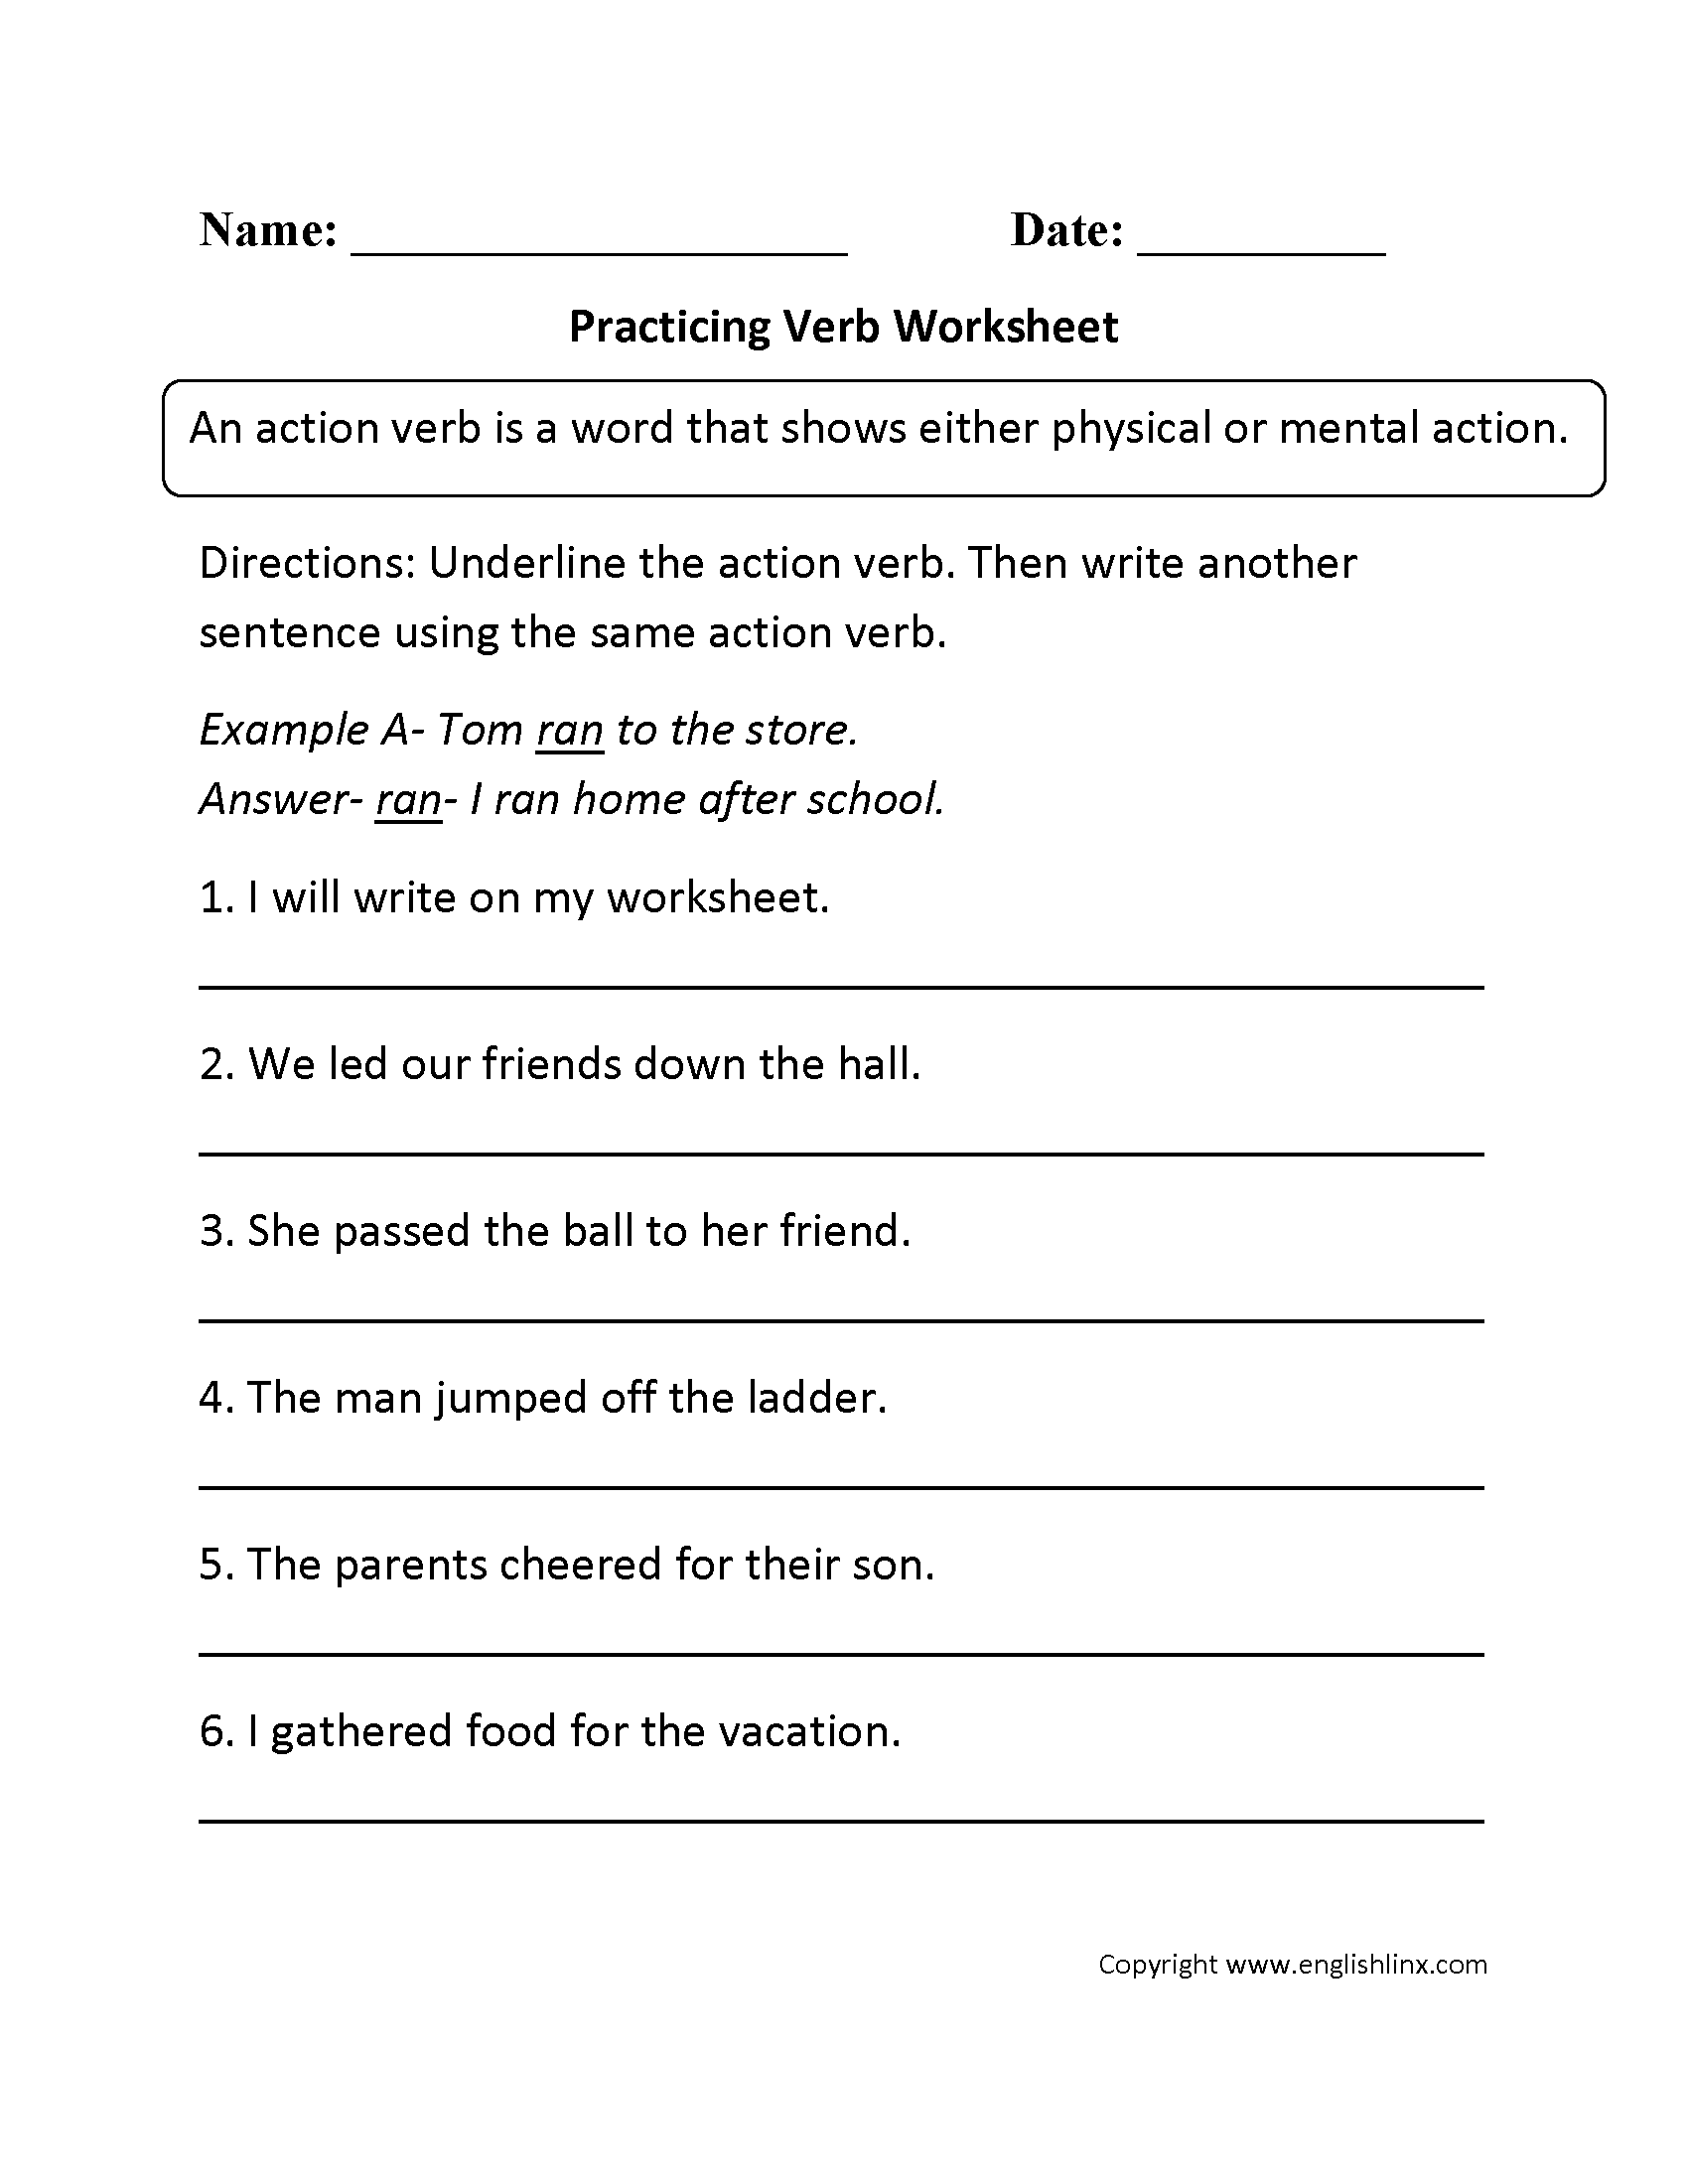 subject-object-study-worksheet-common-core